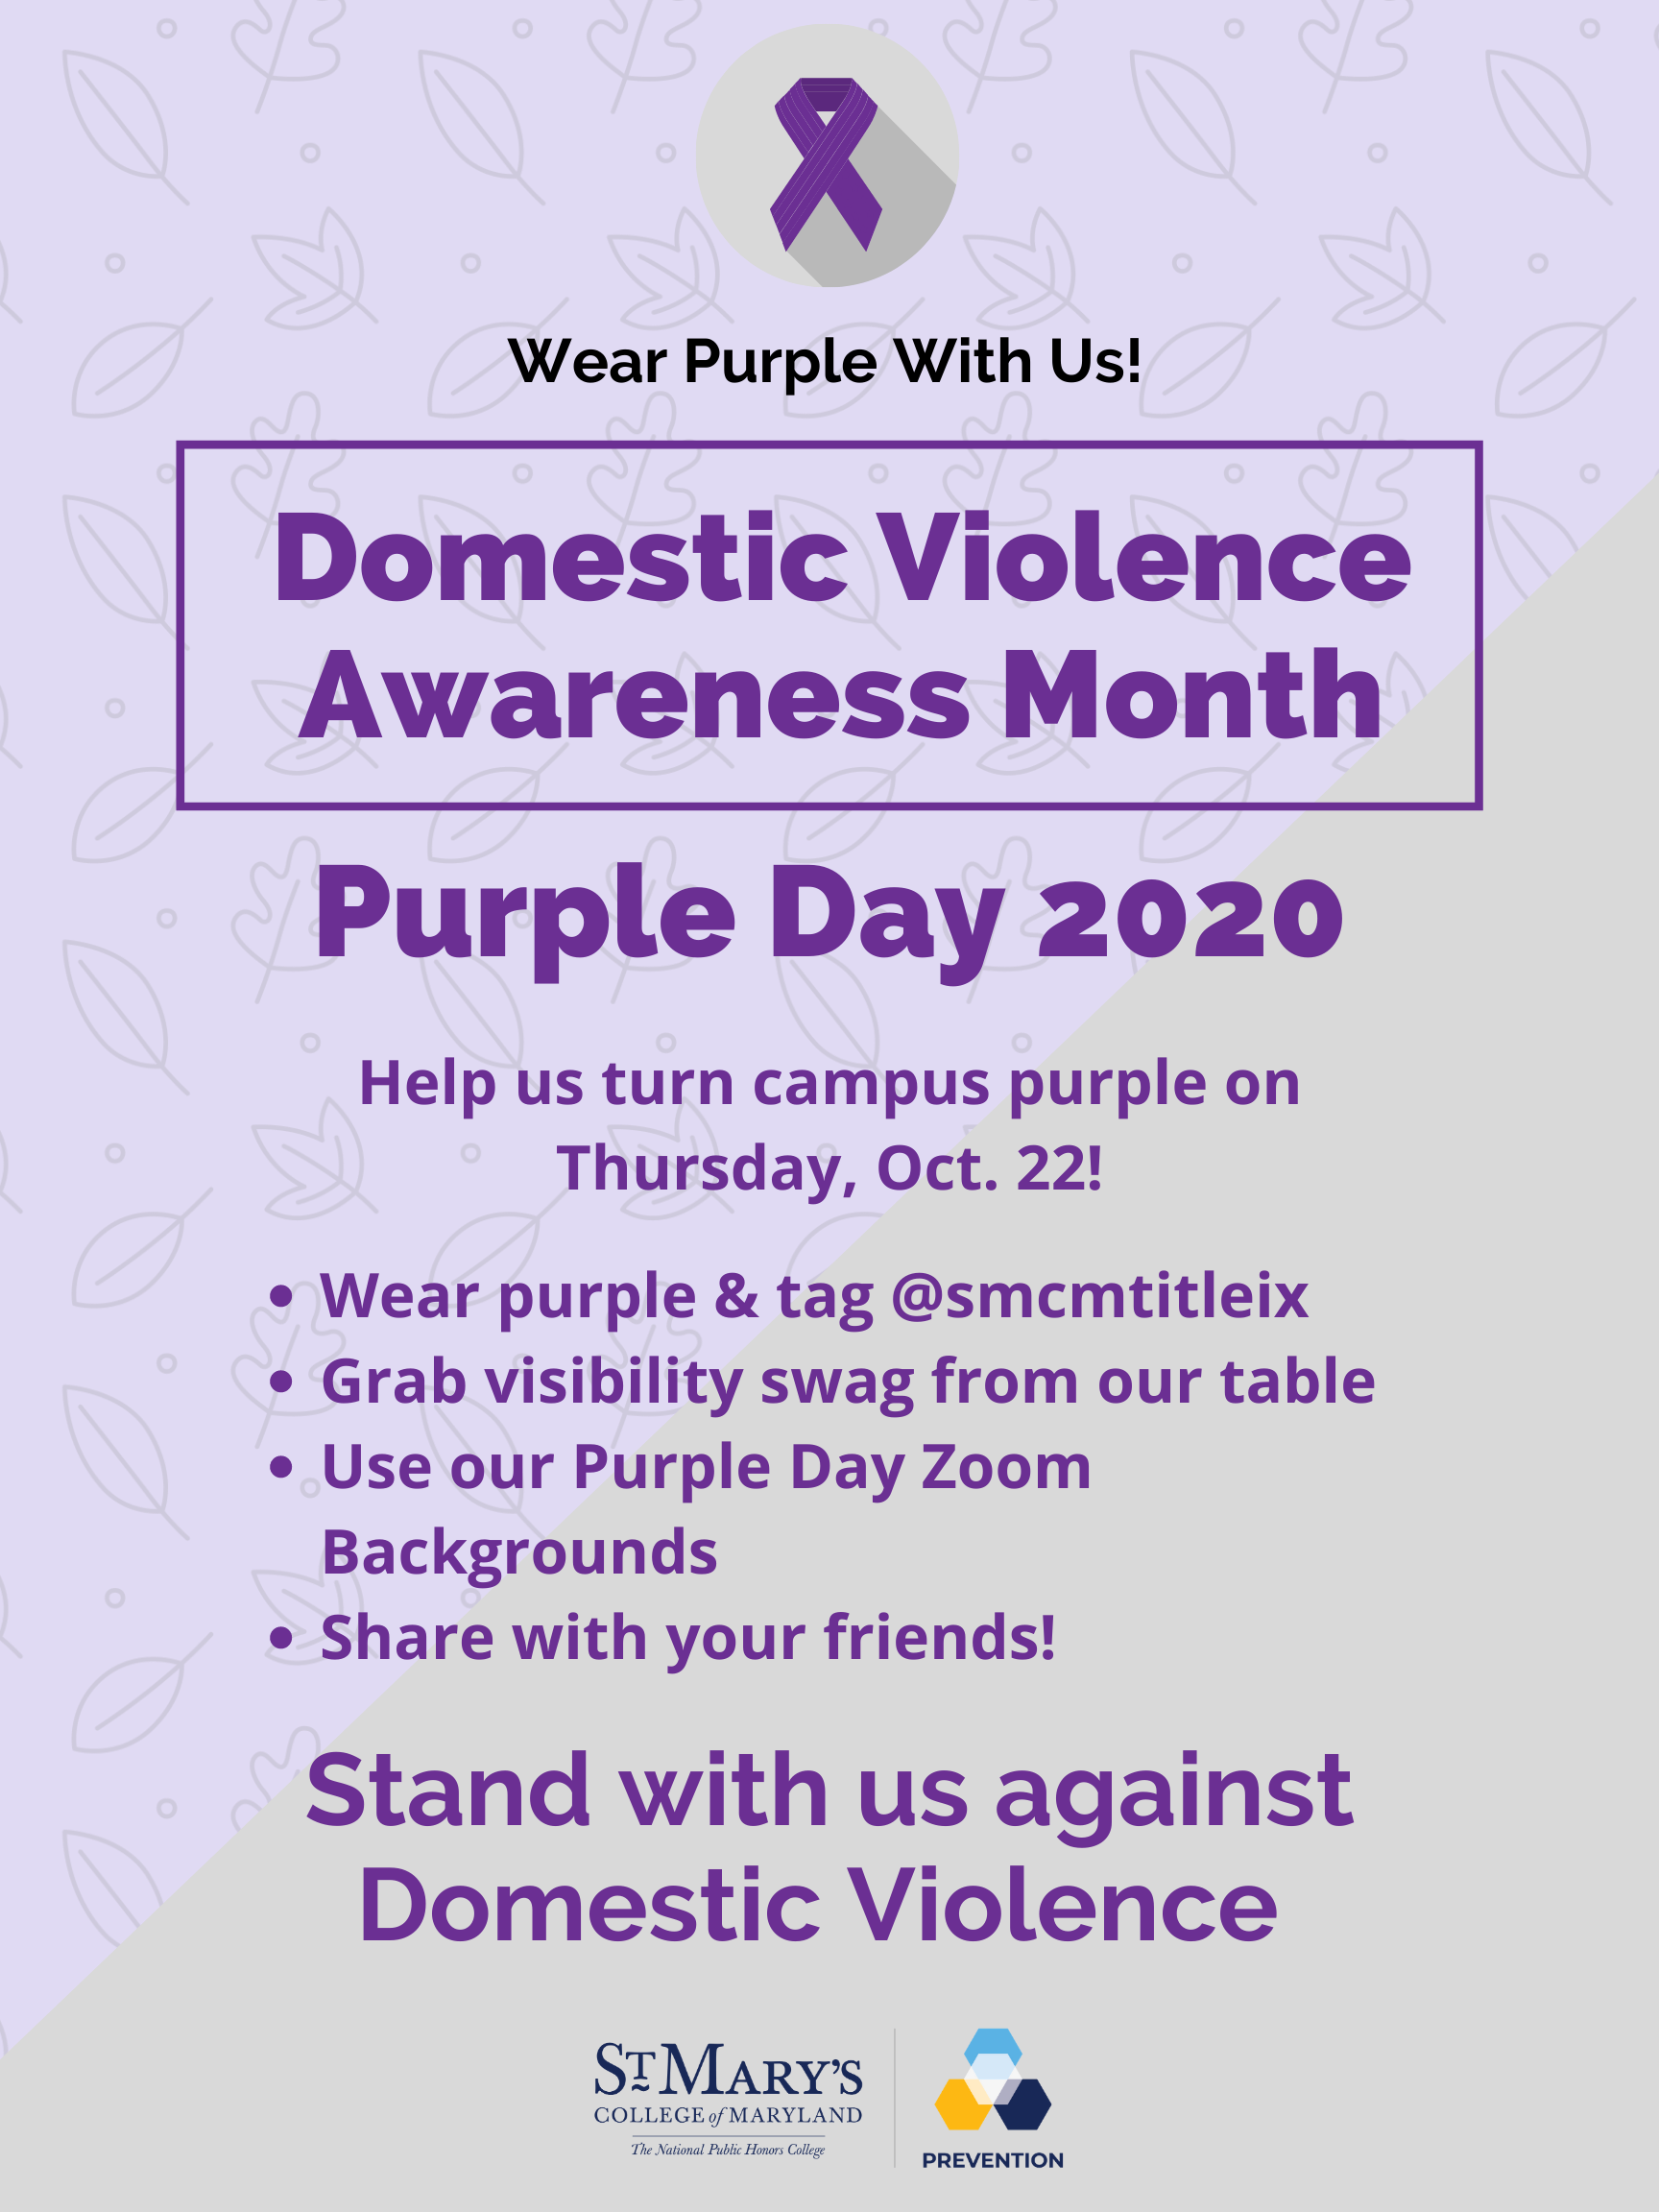 Purple Poster with flowers Advertising Purple Day. Details are repeated in the announcement. 